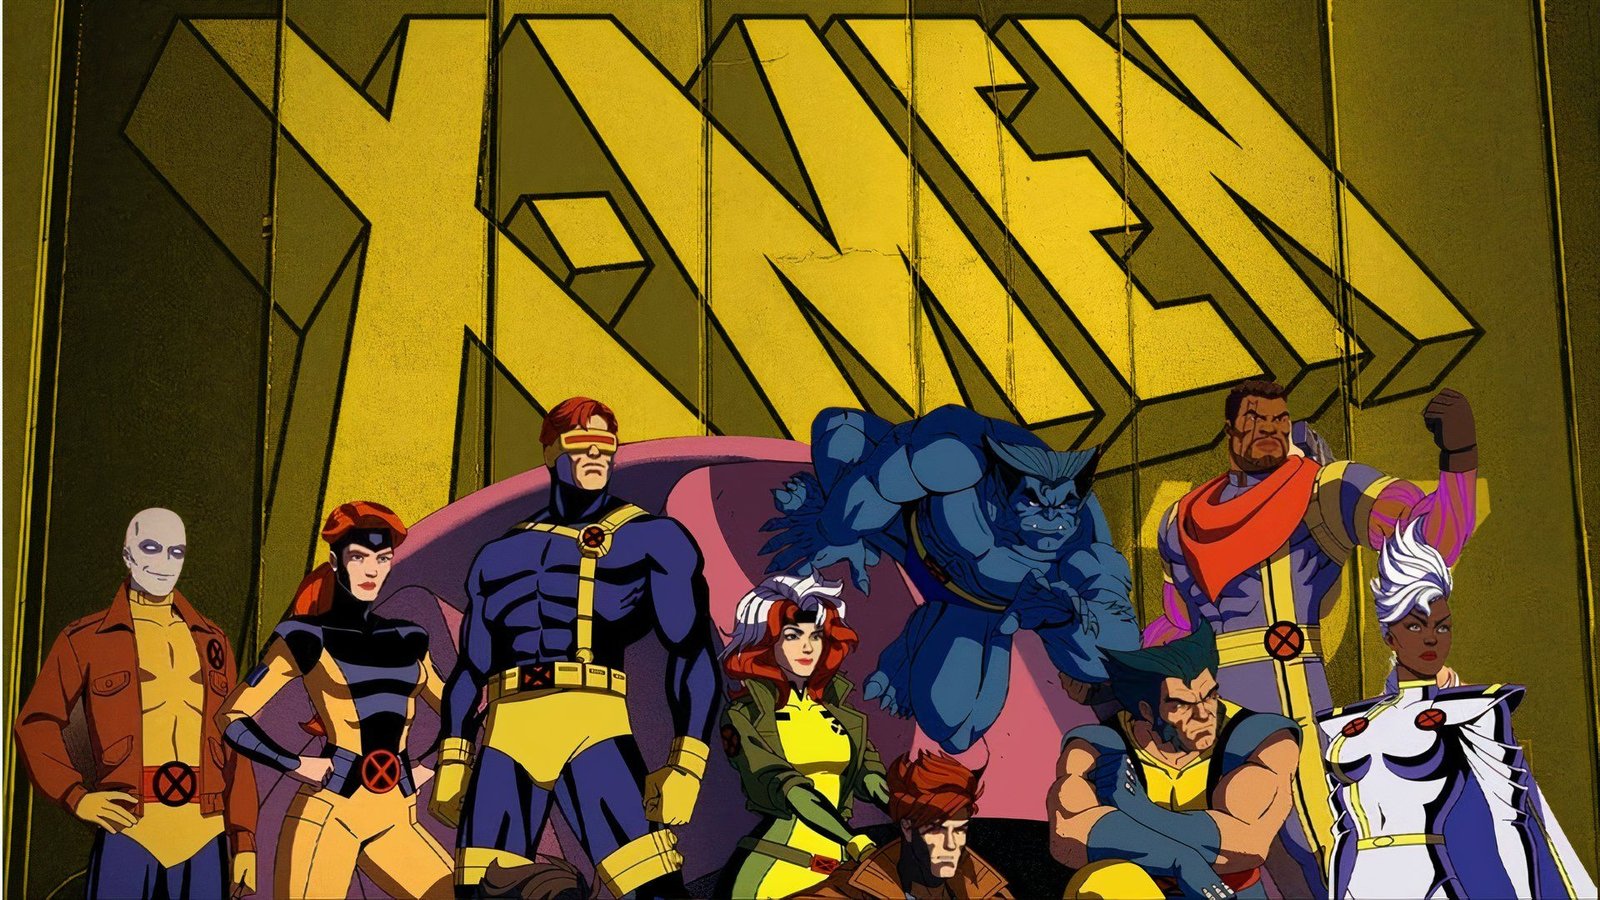 X-Men '97's New Characters and Mutants, Explained